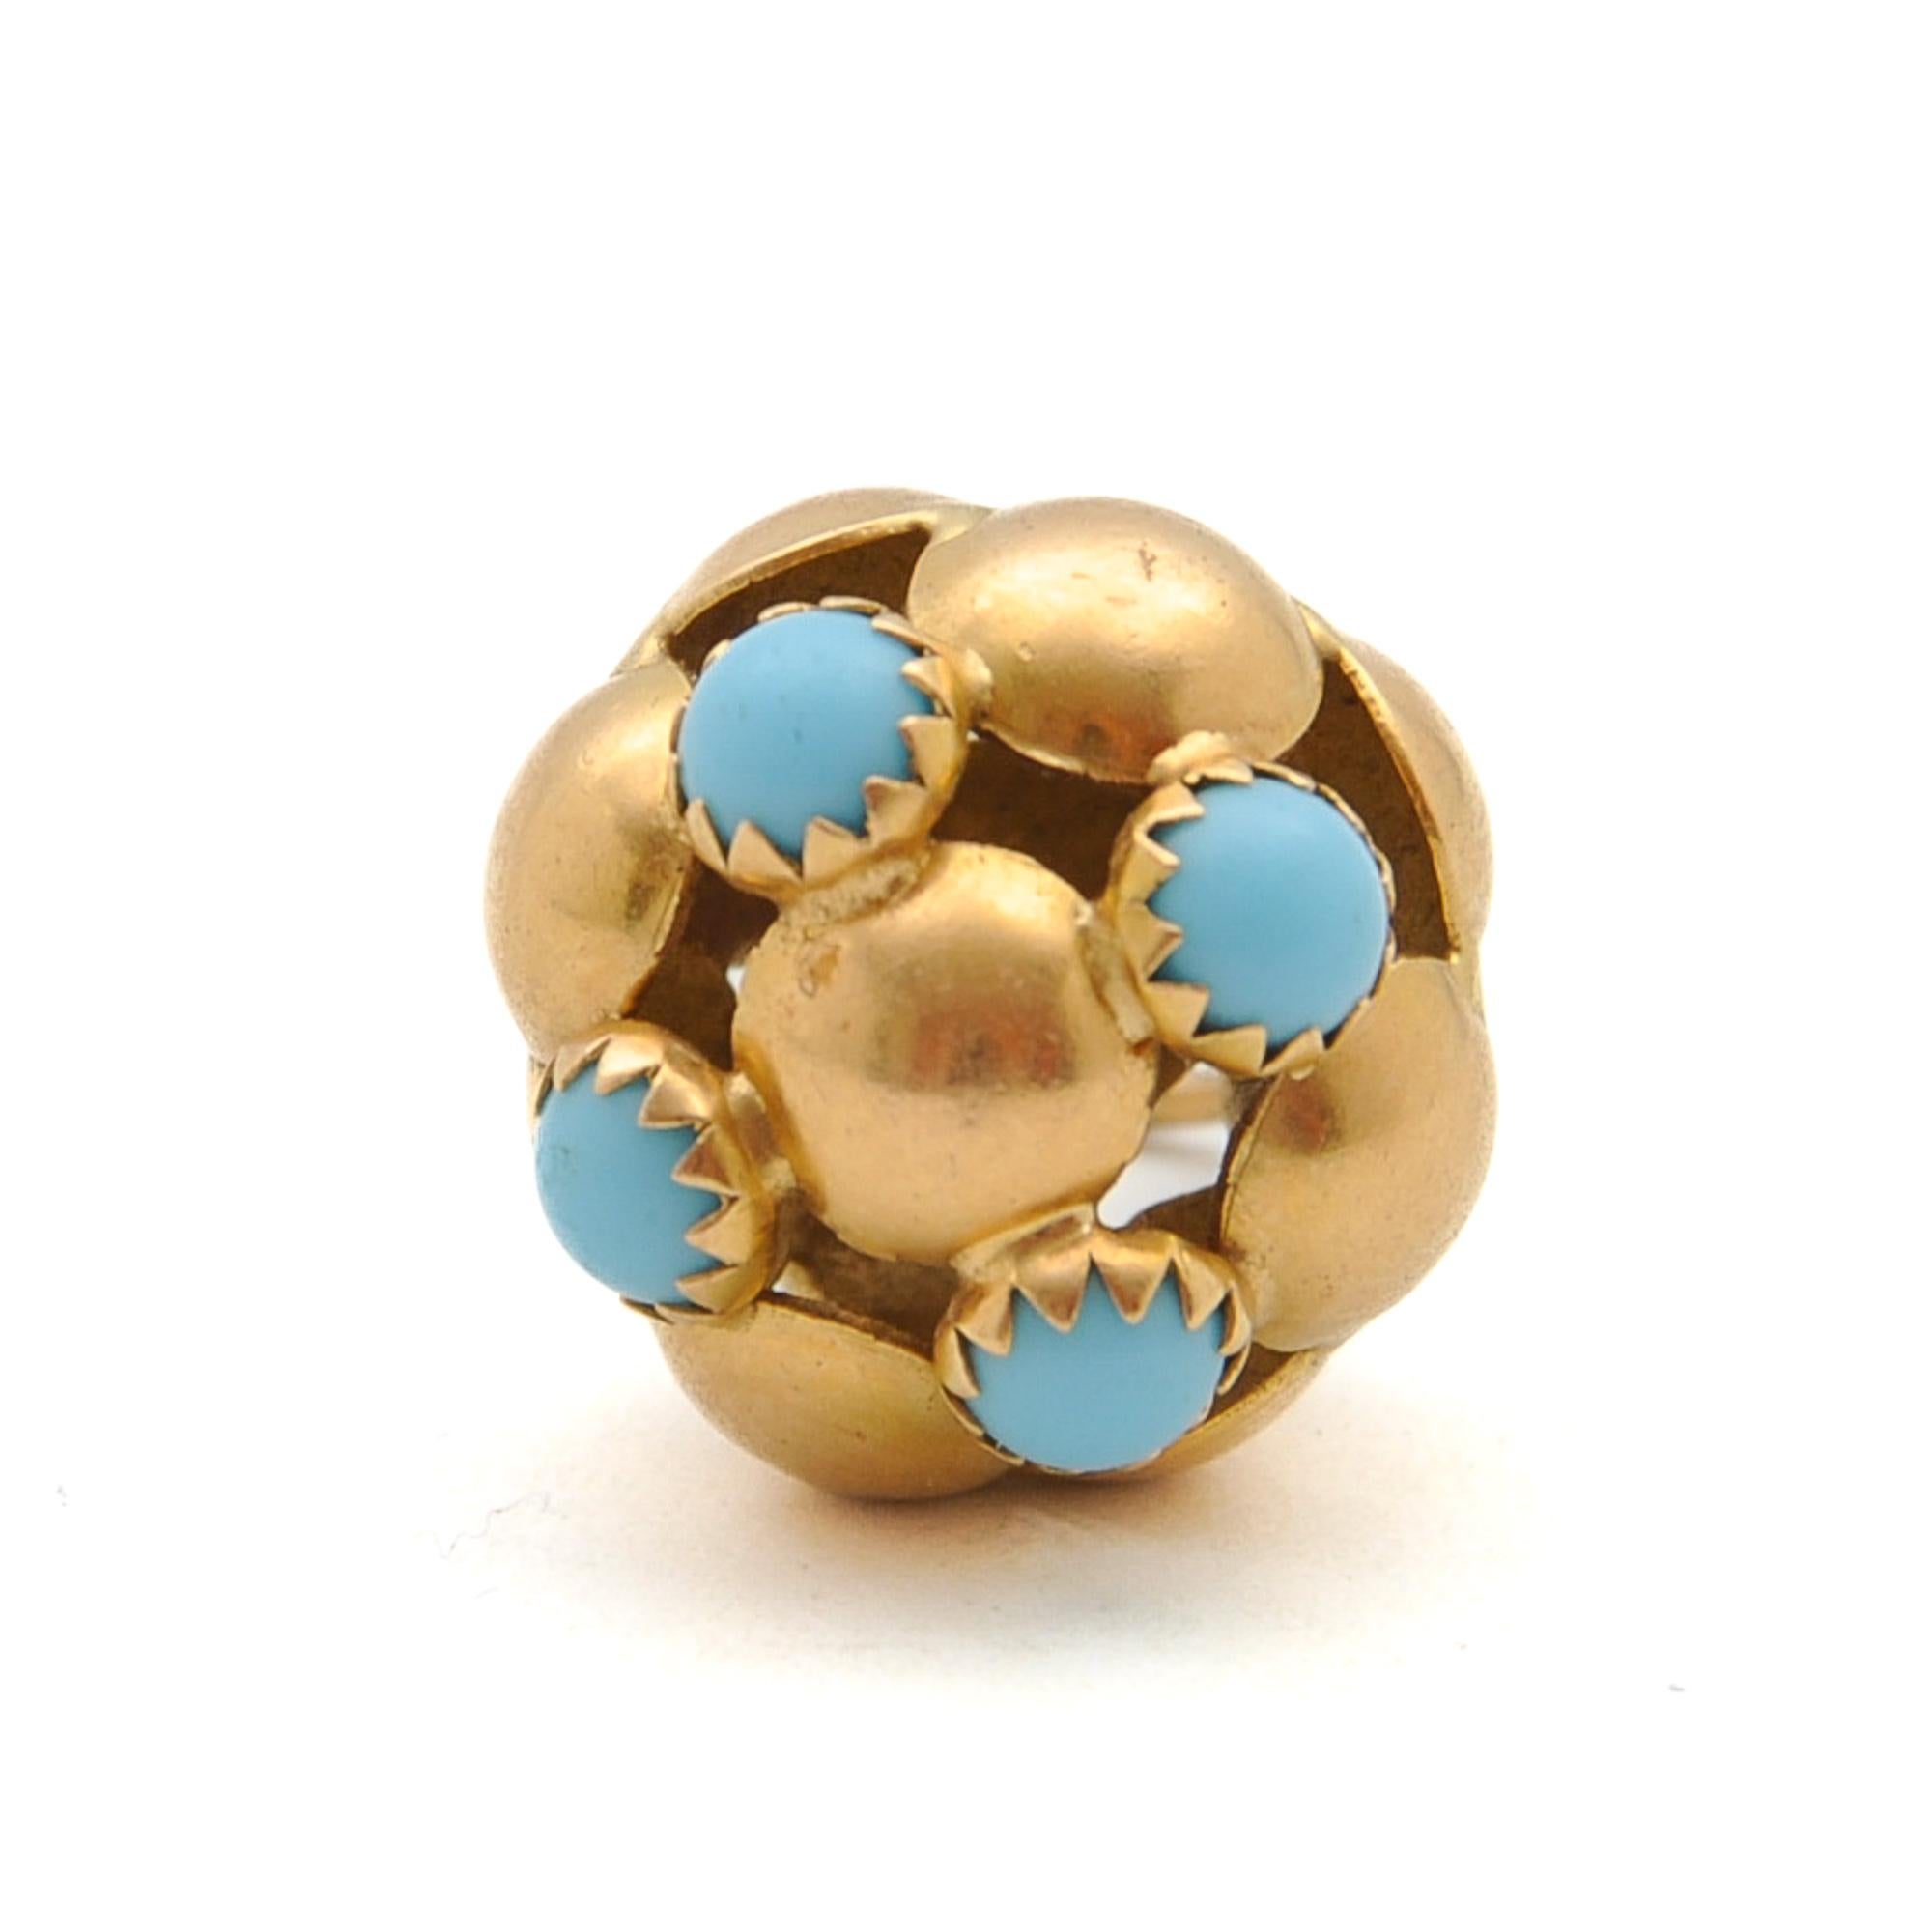 Vintage 18K Gold and Turquoise Ball Charm Pendant For Sale 3